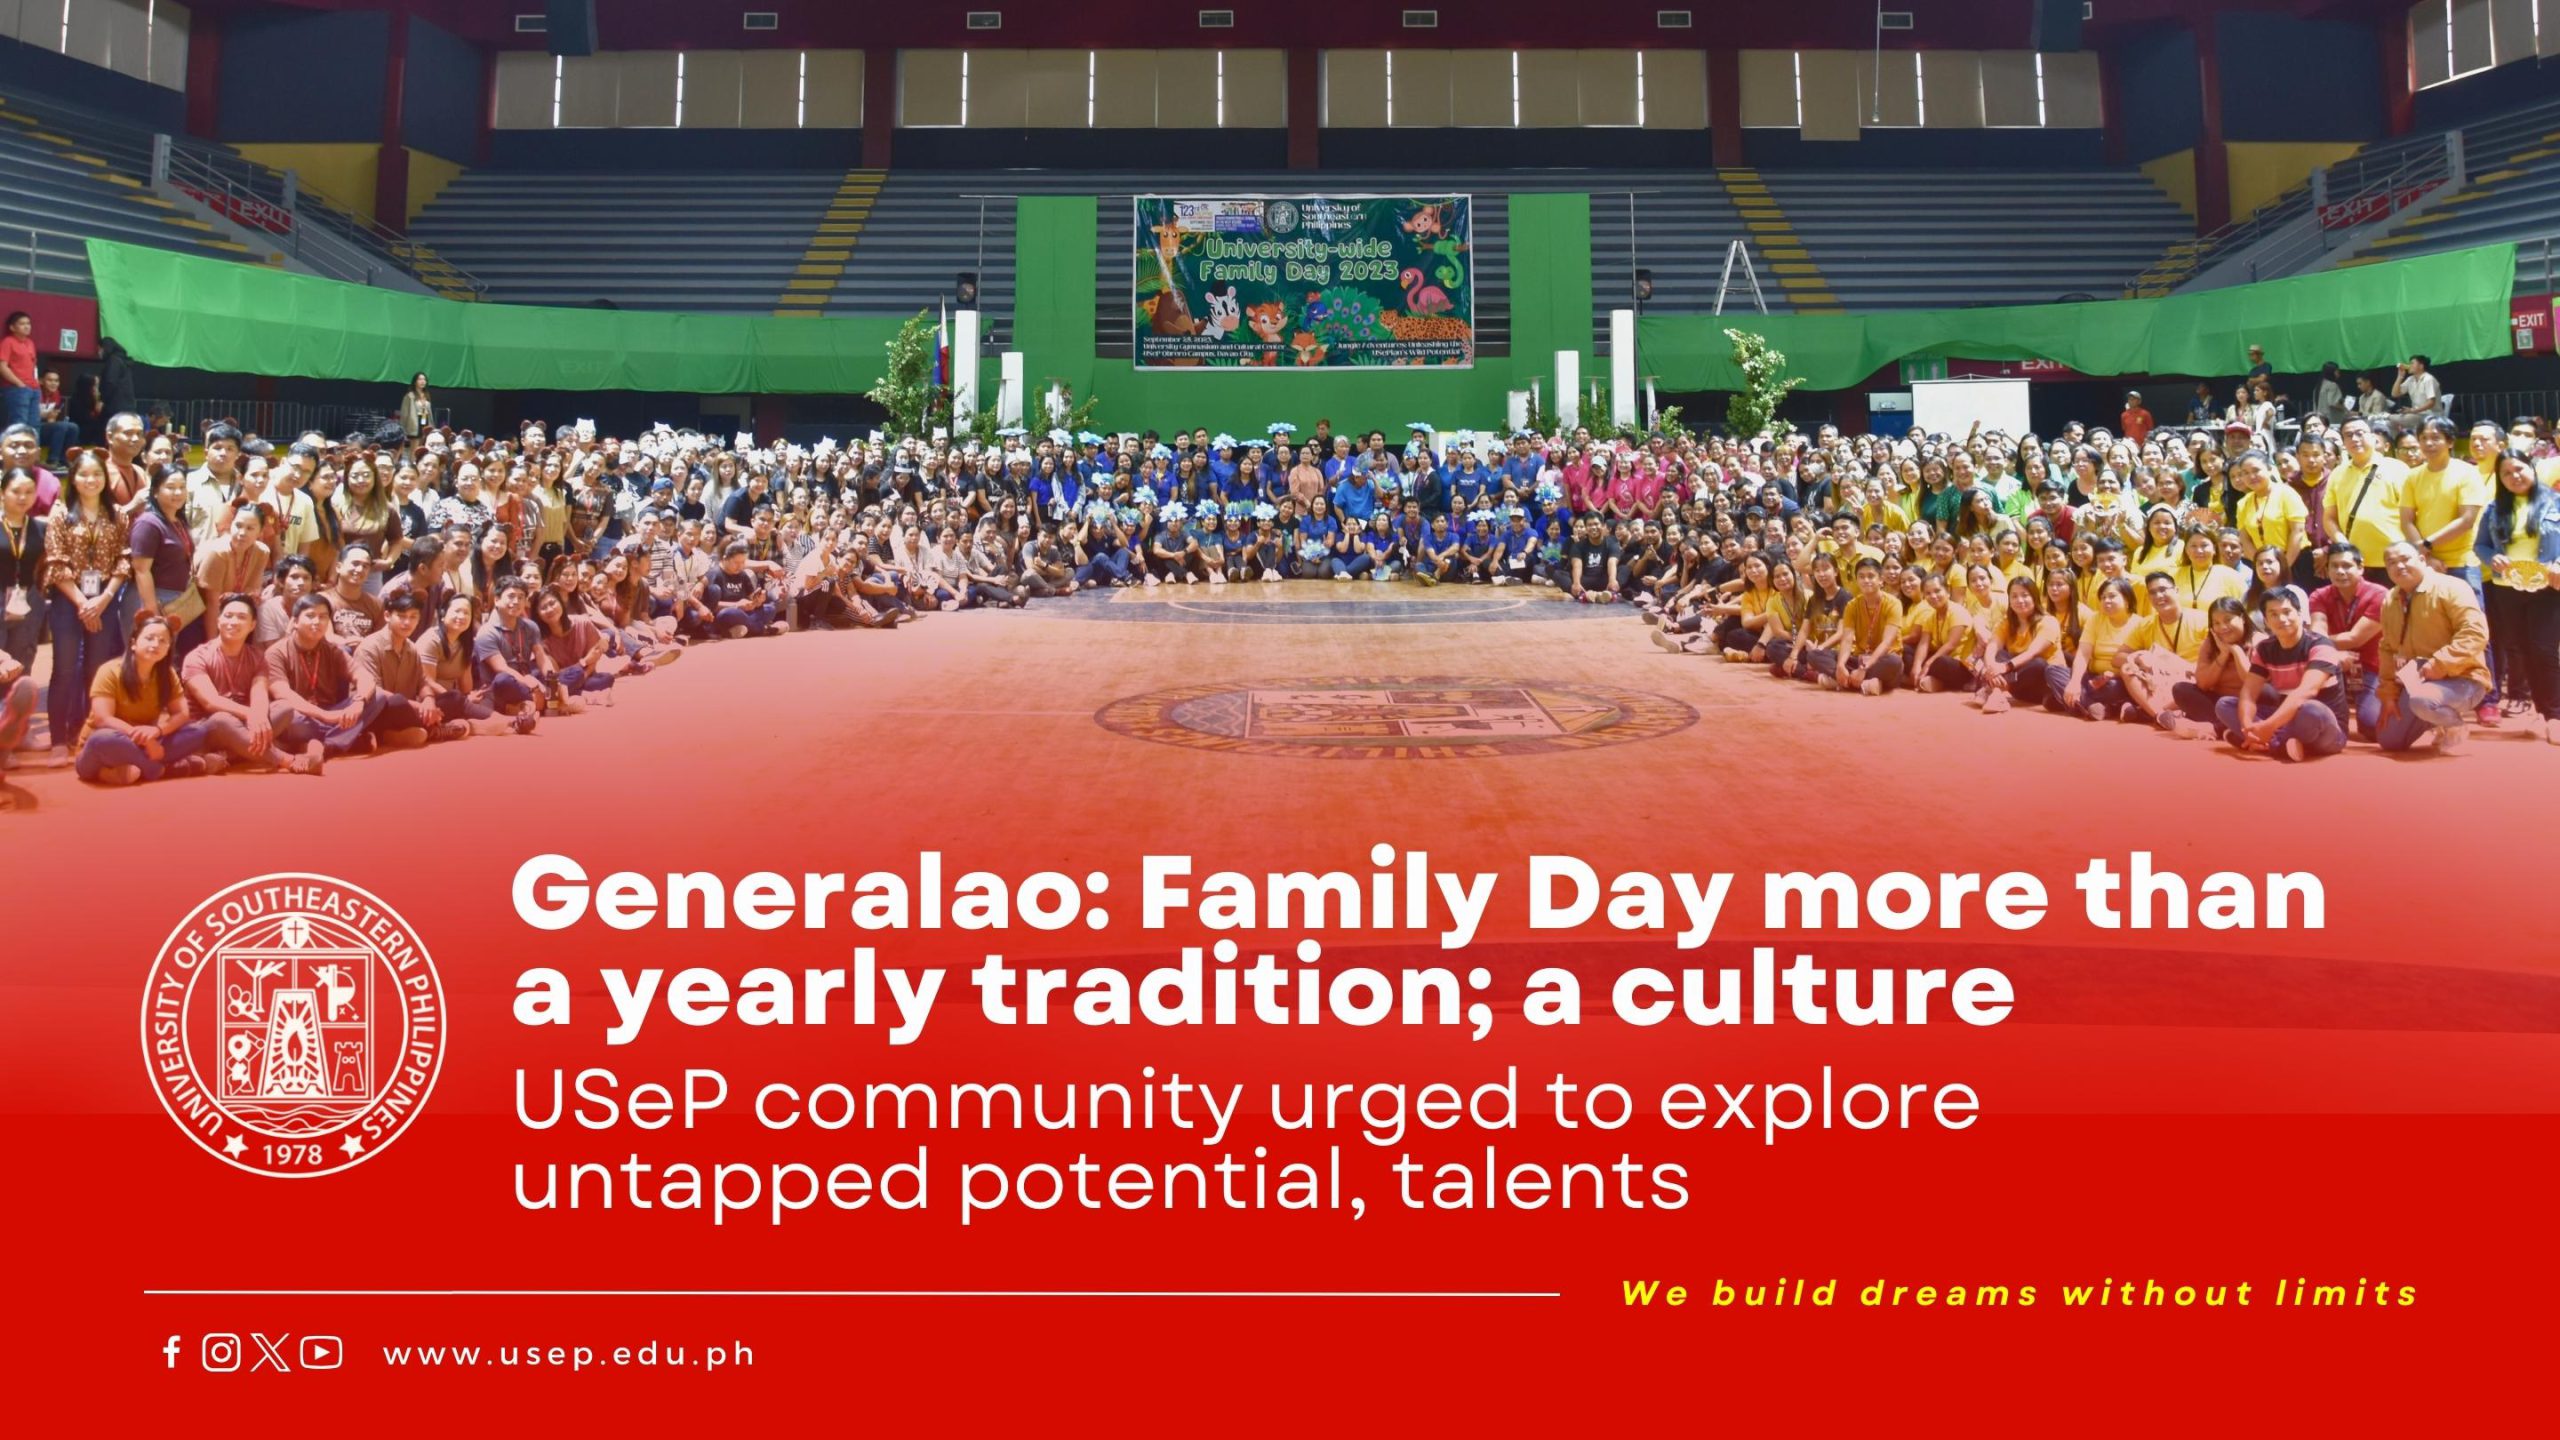 Generalao: Family Day more than a yearly tradition; a culture; USeP community urged to explore untapped potential, talents